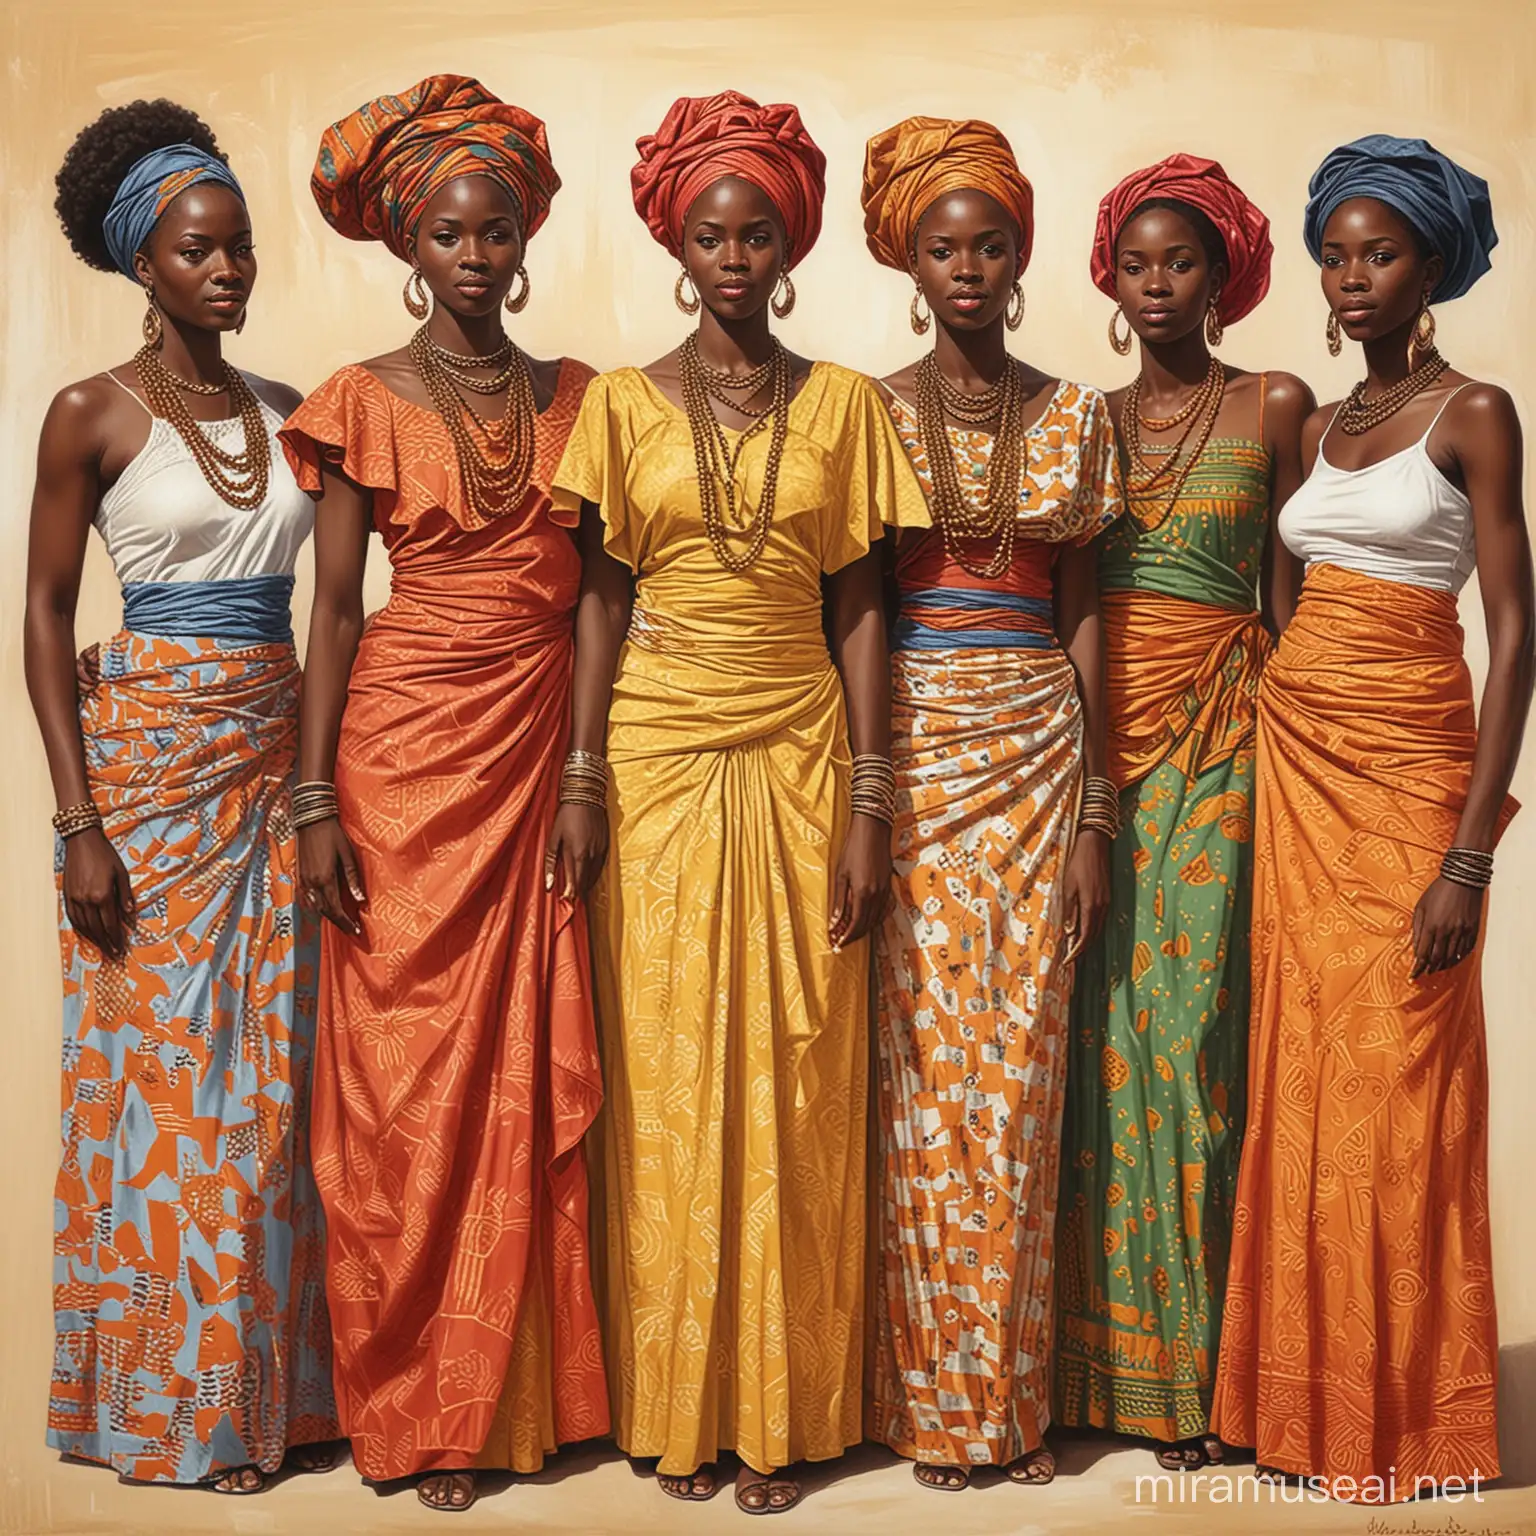 African Women Gathering in the Vibrant Art Style of Madge Scott